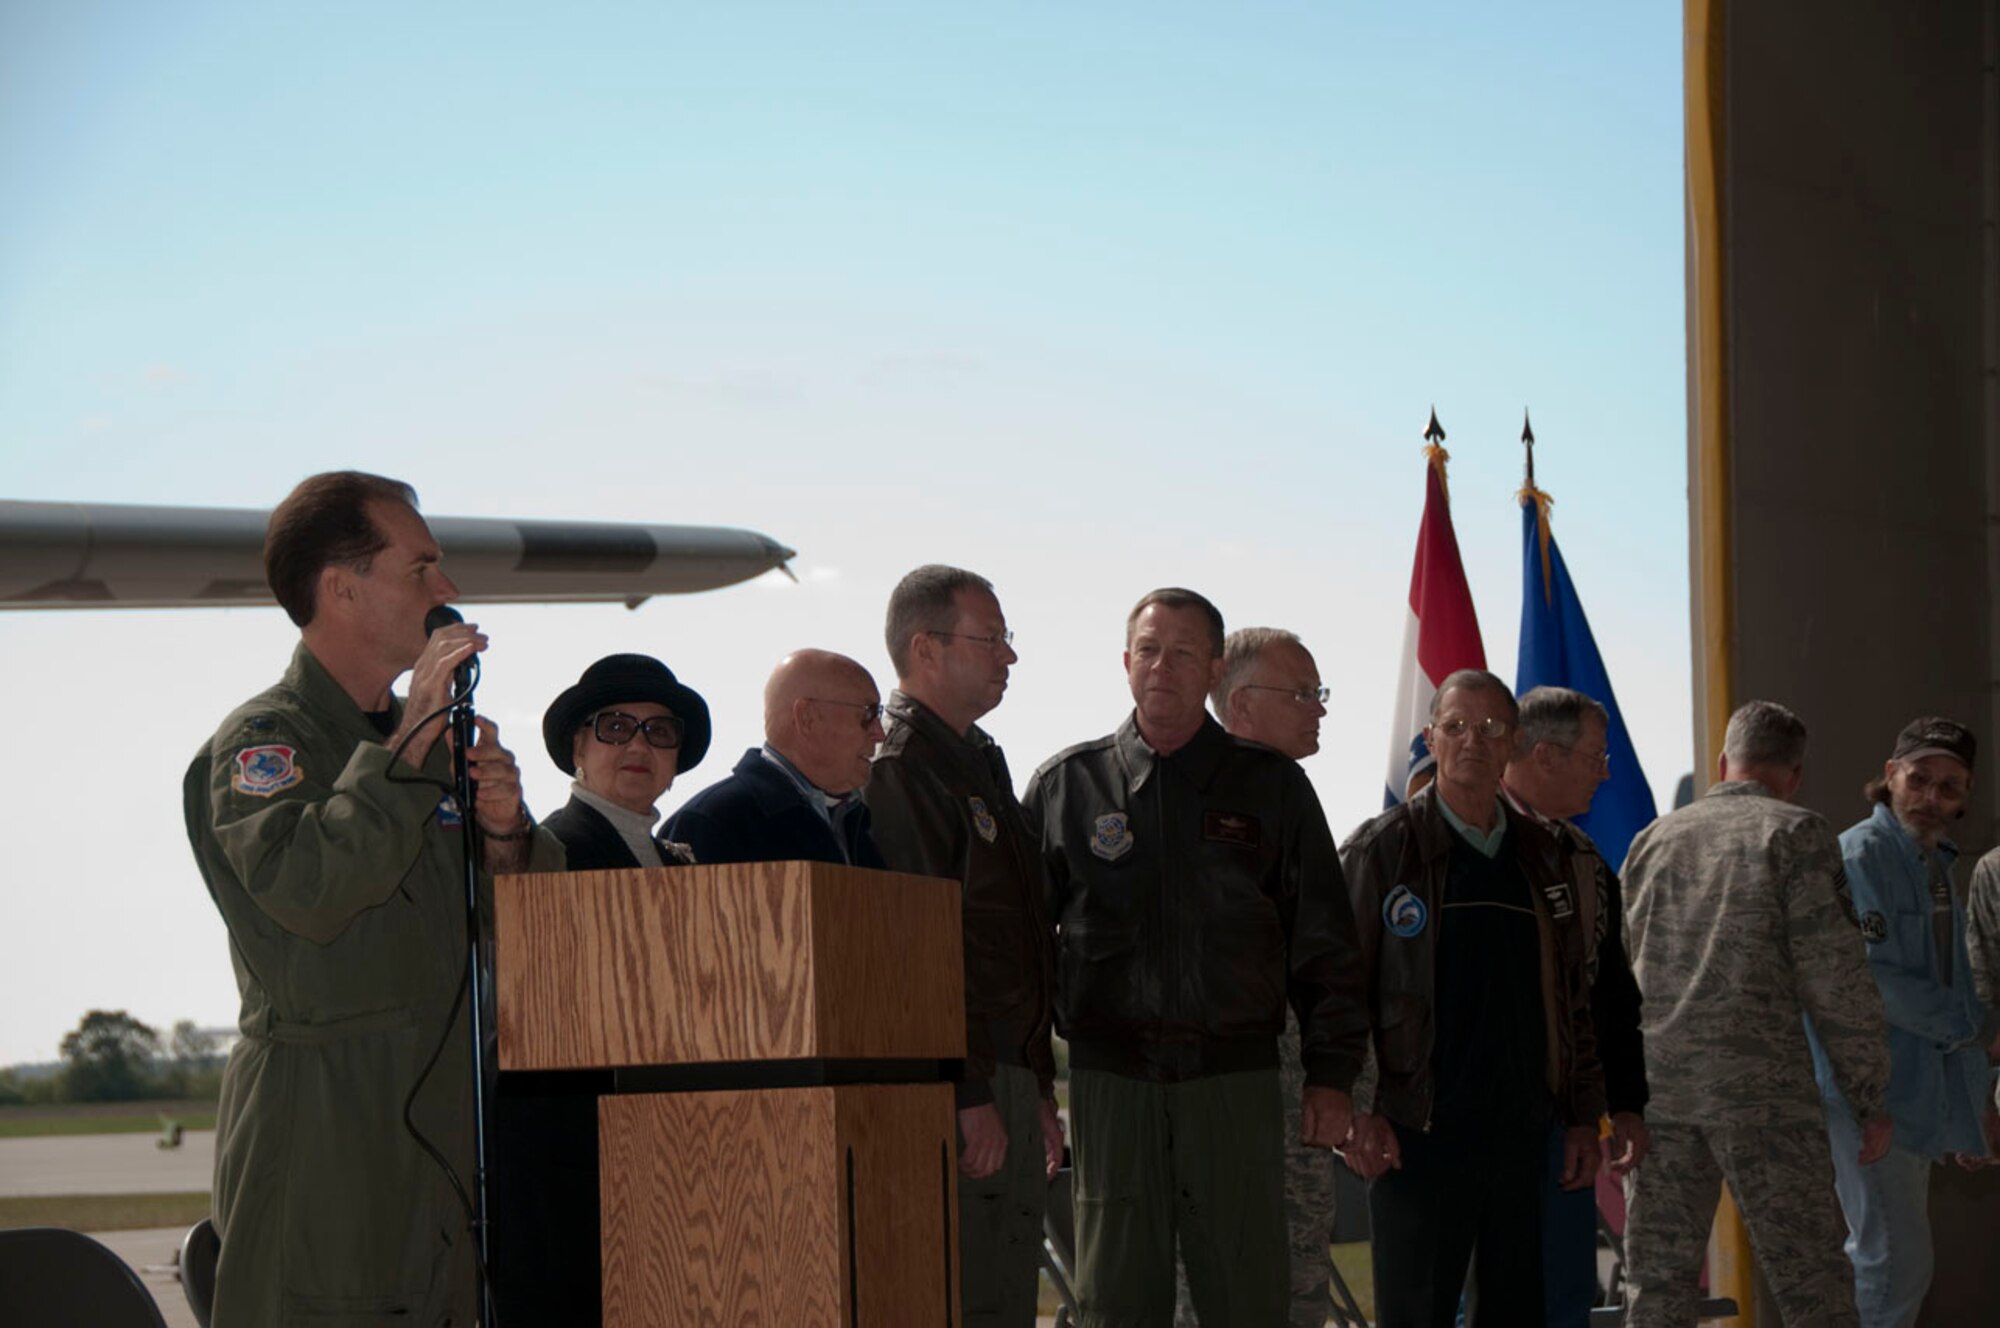 Col. Mike McEnulty, 139th Airlift Wing commander, introduces distinguished guests at the aircraft departure ceremony. Distinguished guests include; former 6th district representative Pat Danner-Meyer, Markt Meyer (former 180th pilot), Brig. Gen. John Owen, Brig. Gen. Stephen Cotter, Col. Andy Halter, Col. (RET) Ken Gabriel, Col. (RET) Gene Davenport.  Not shown; Senior Master Sgt. (RET) George Roberts (original crew chief for aircraft 1396), A1C Chris Prygron (Newest flight line crew chief).  (U.S. Air Force photo by Airman 1st Class Sheldon Thompson)